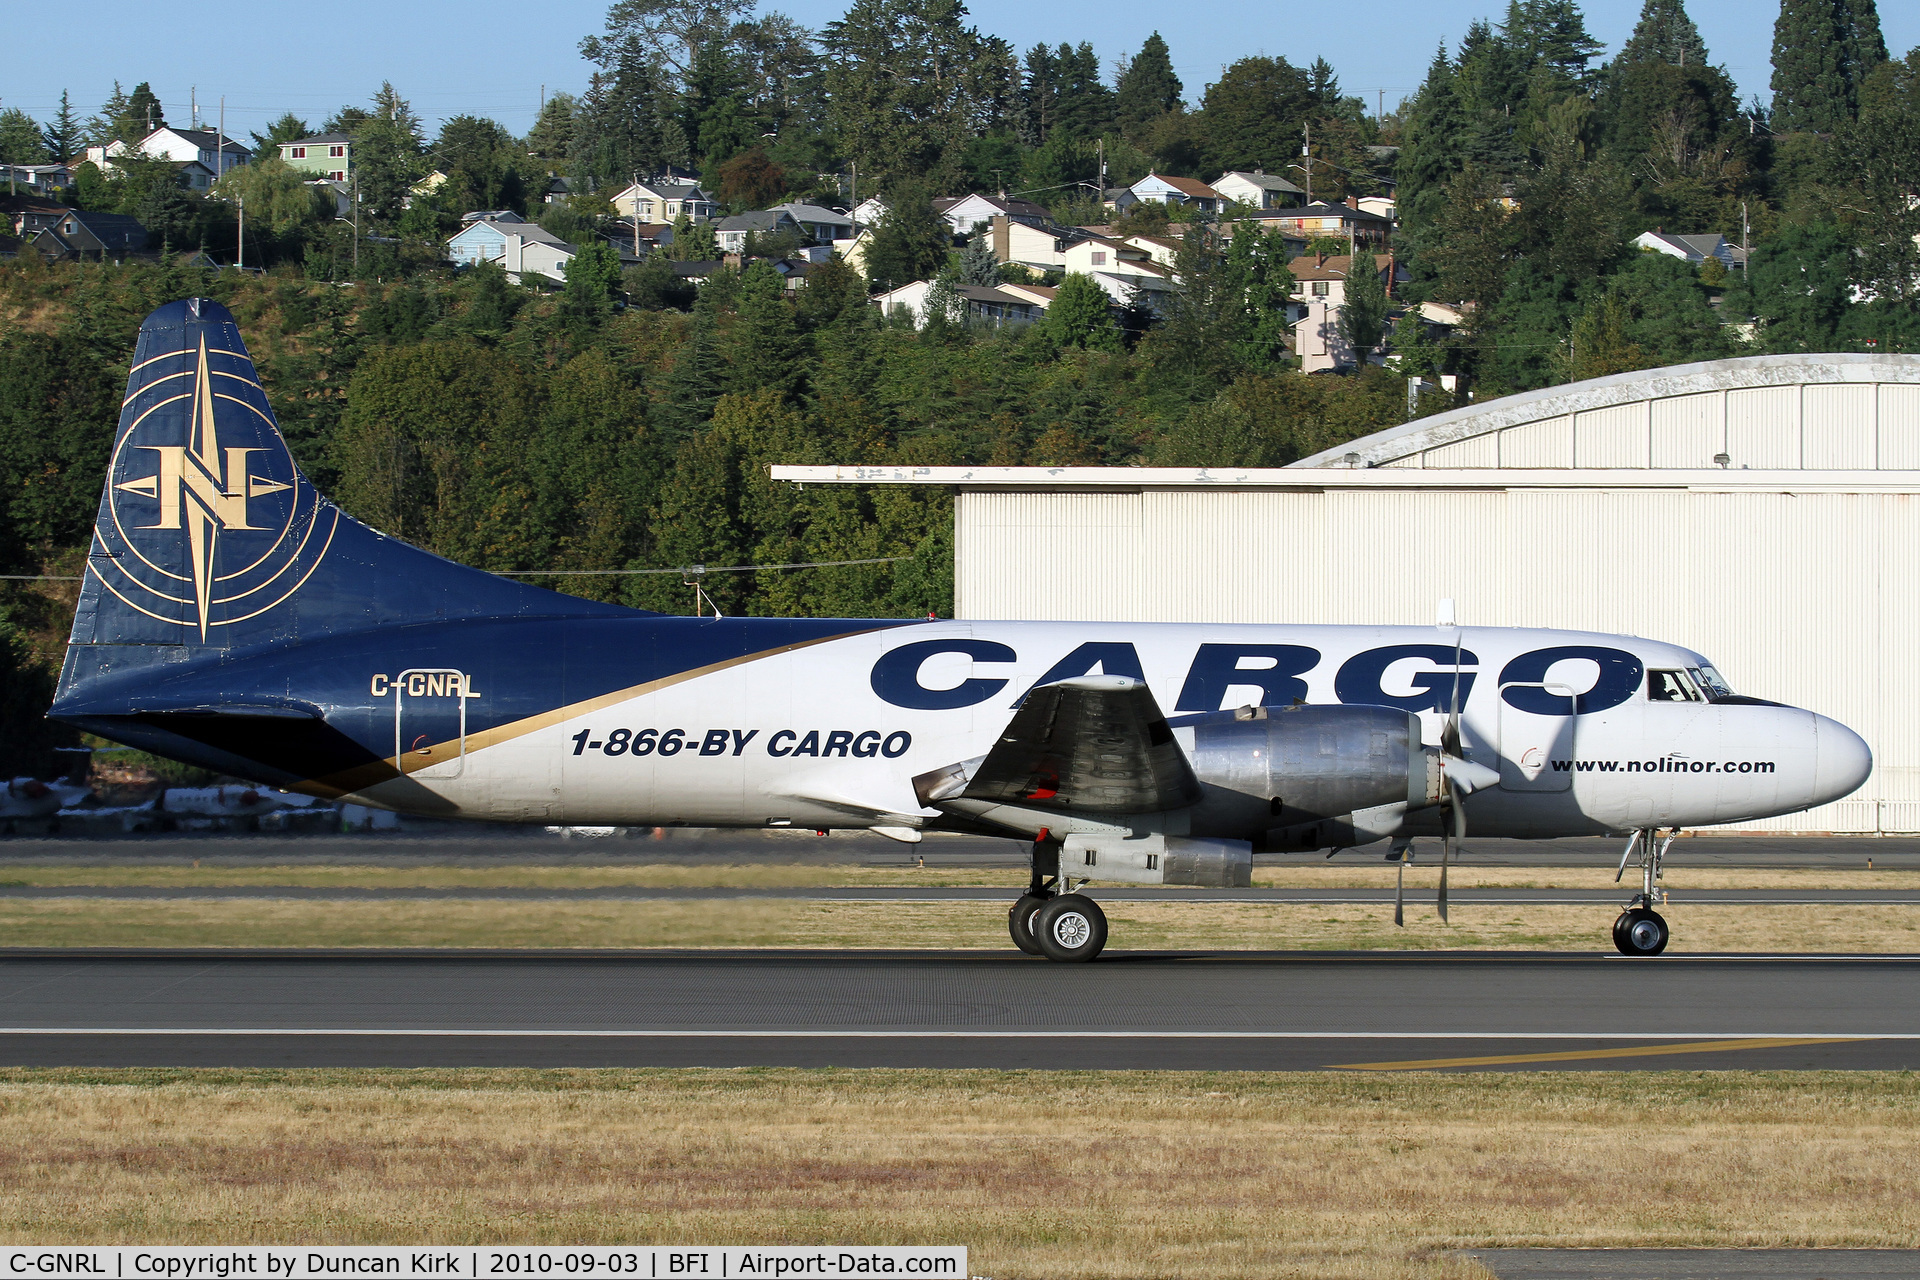 C-GNRL, 1956 Convair 580(F) C/N 375, Nolinor Cargo operates daily flights from Calgary in support of UPS at BFI